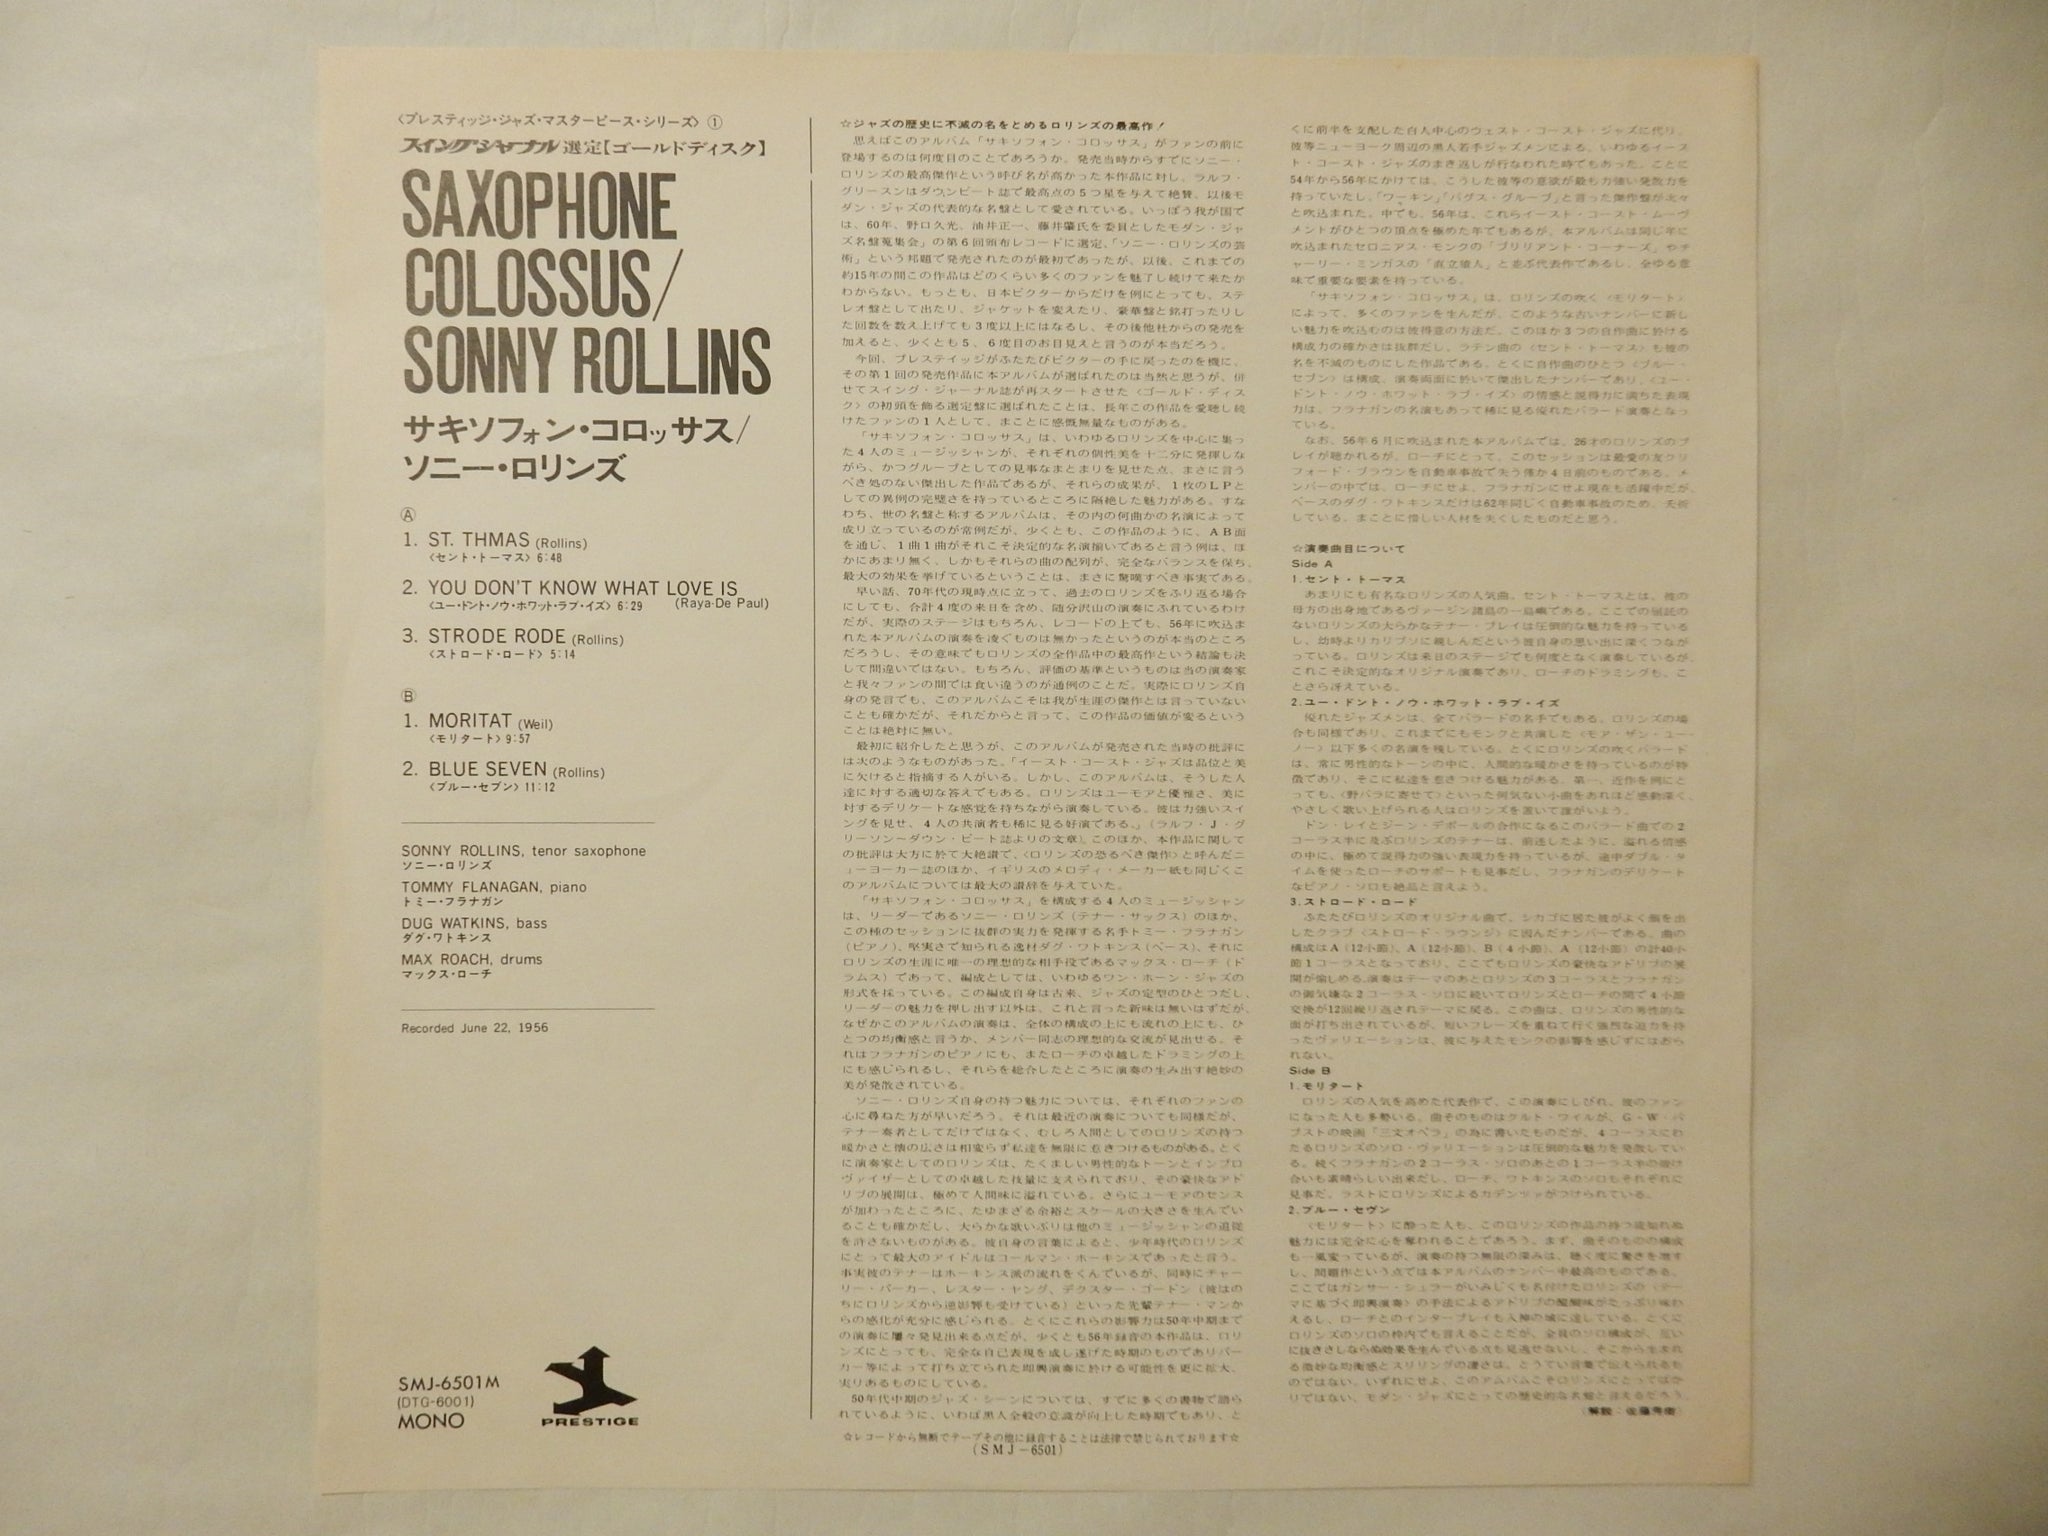 Sonny Rollins - Saxophone Colossus (LP-Vinyl Record/Used